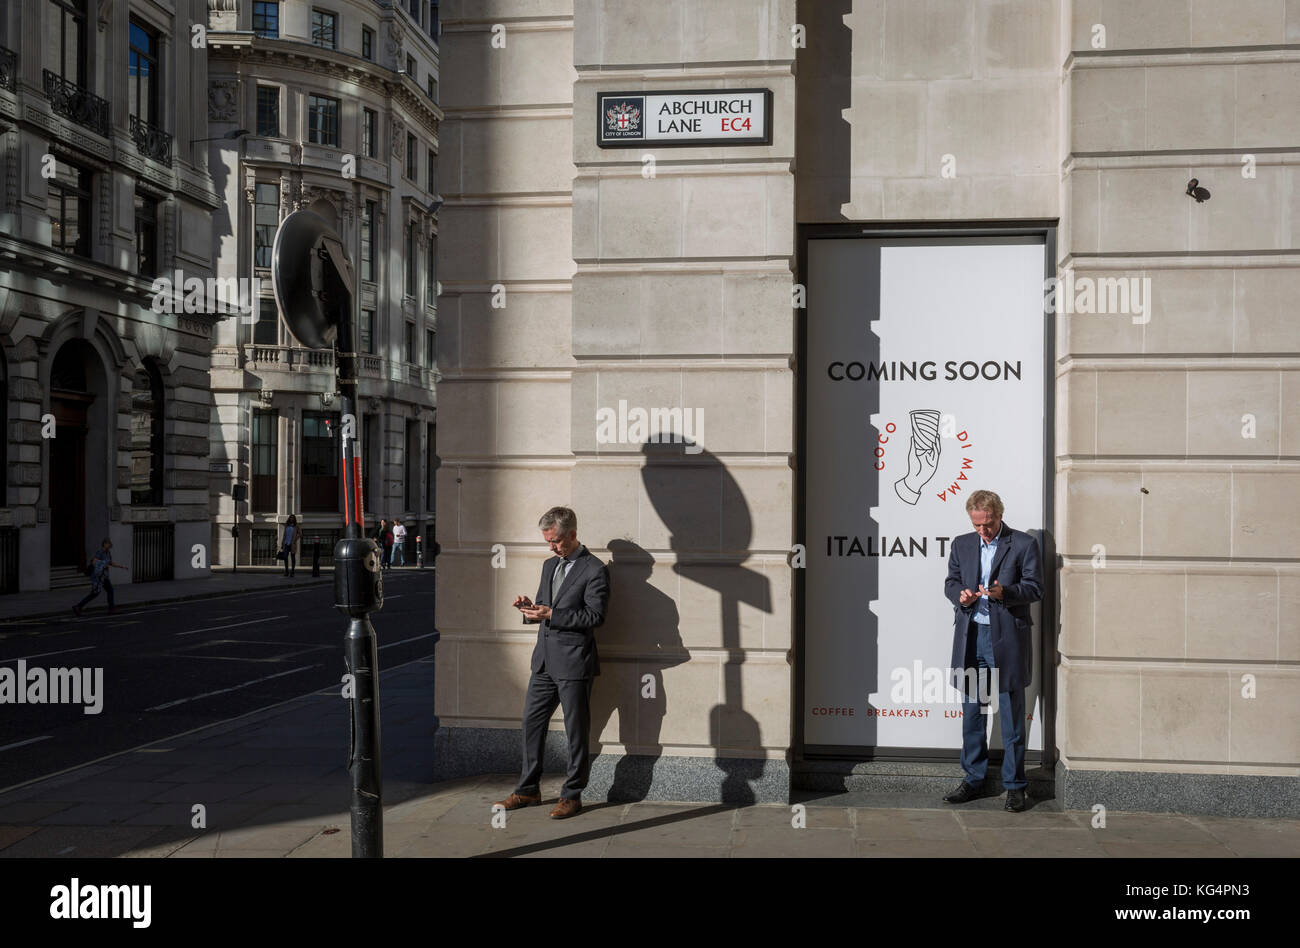 City businessmen check for messages and use social media on the corner of King William Street and Abchurch Lane EC4, on 27th October 2017, in the City of London, England. Stock Photo